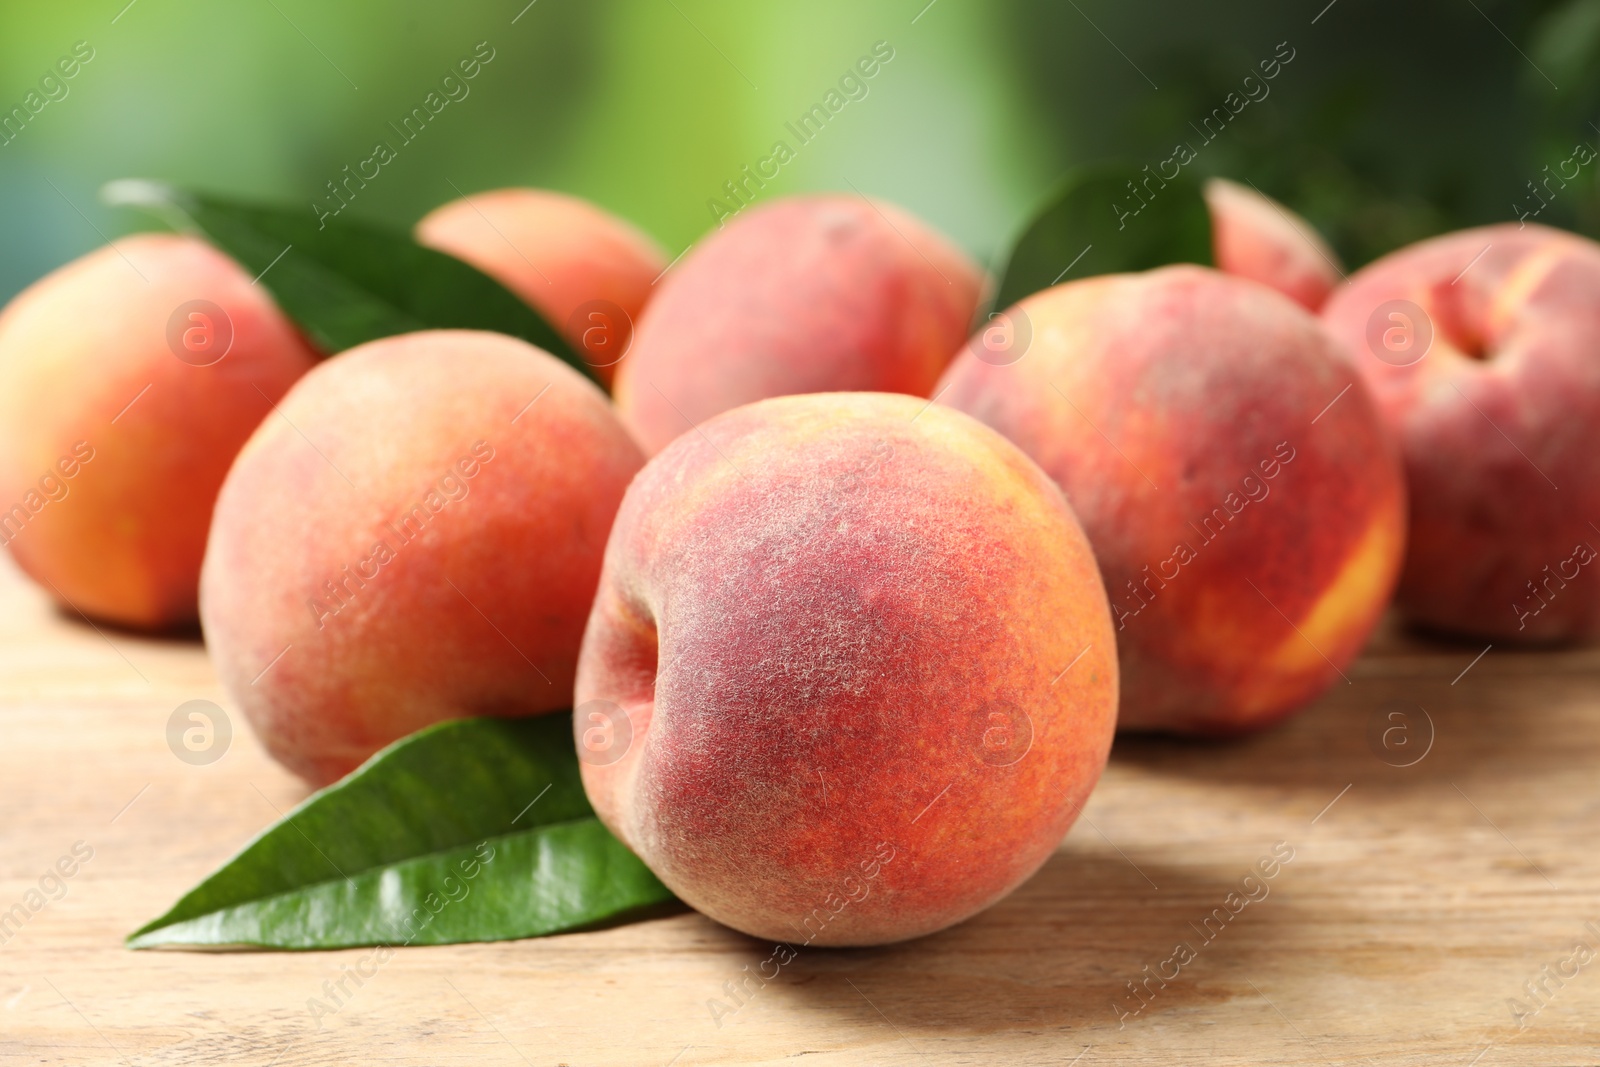 Photo of Many whole fresh ripe peaches and green leaves on wooden table against blurred background, closeup